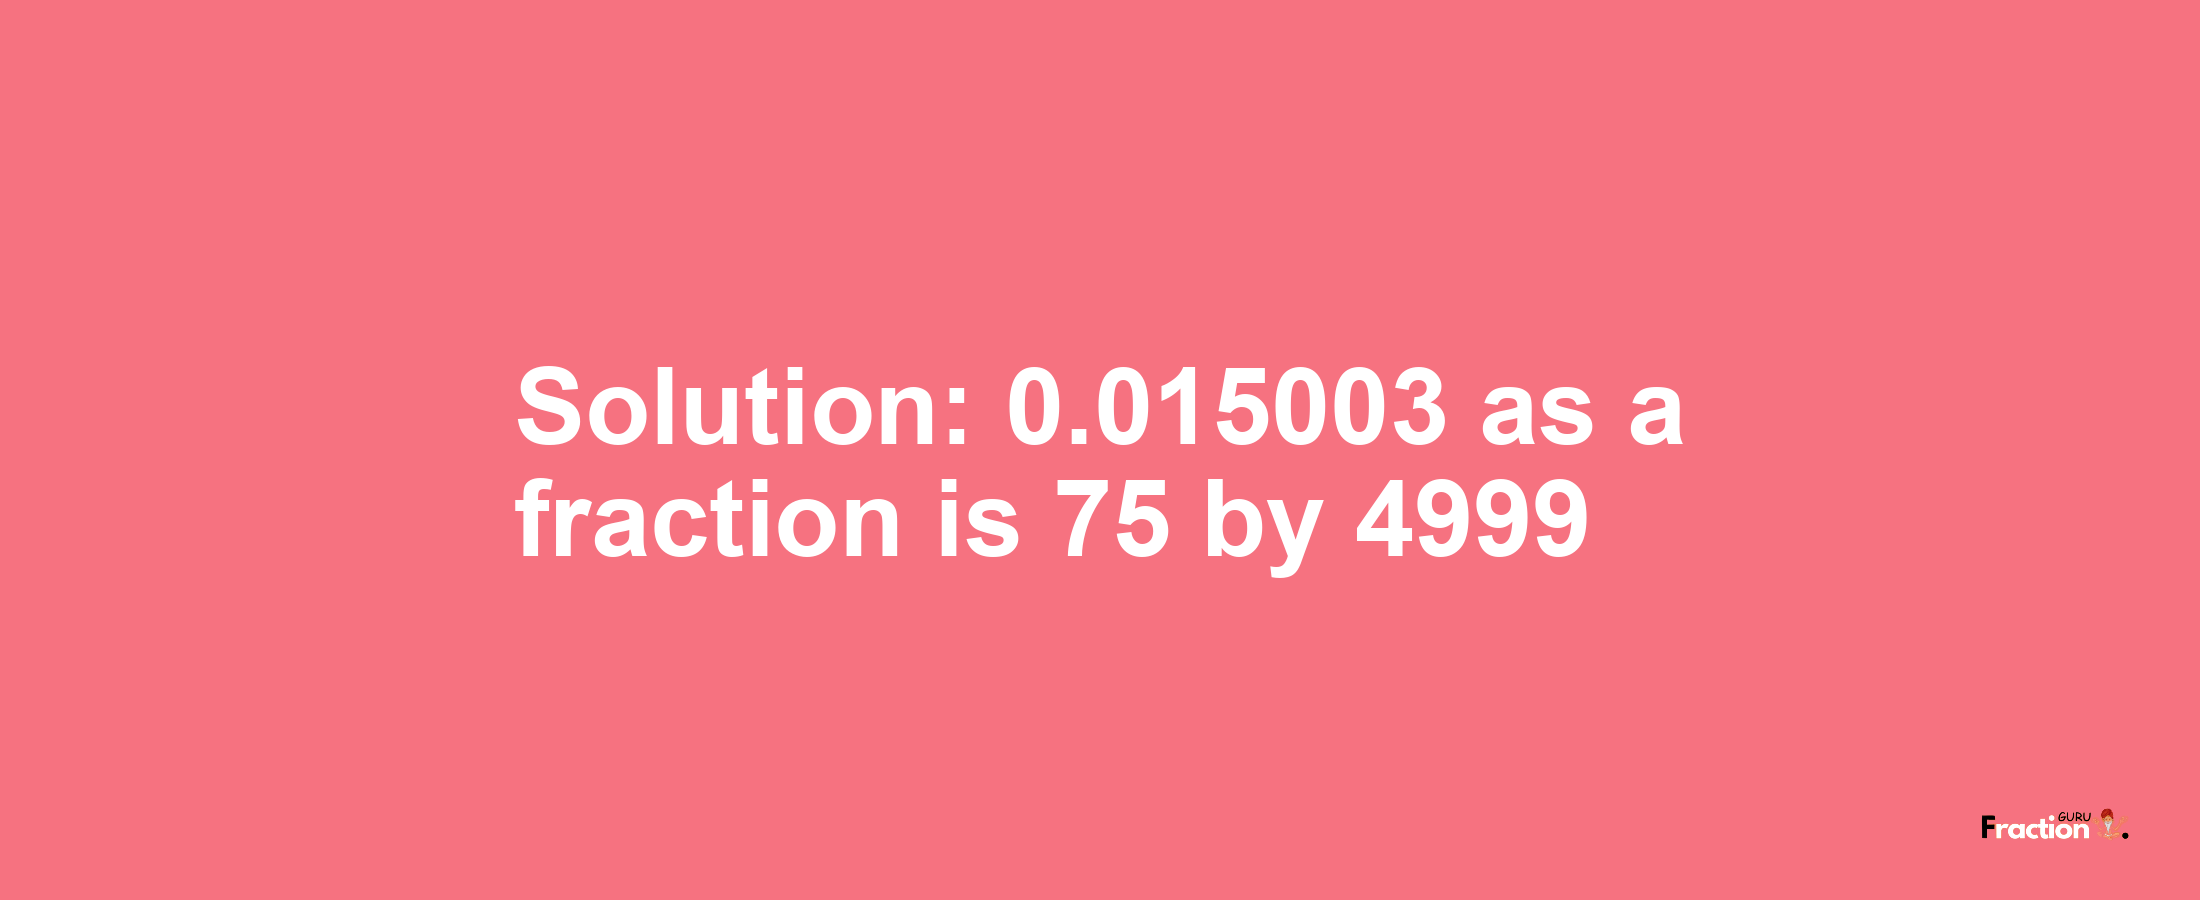 Solution:0.015003 as a fraction is 75/4999